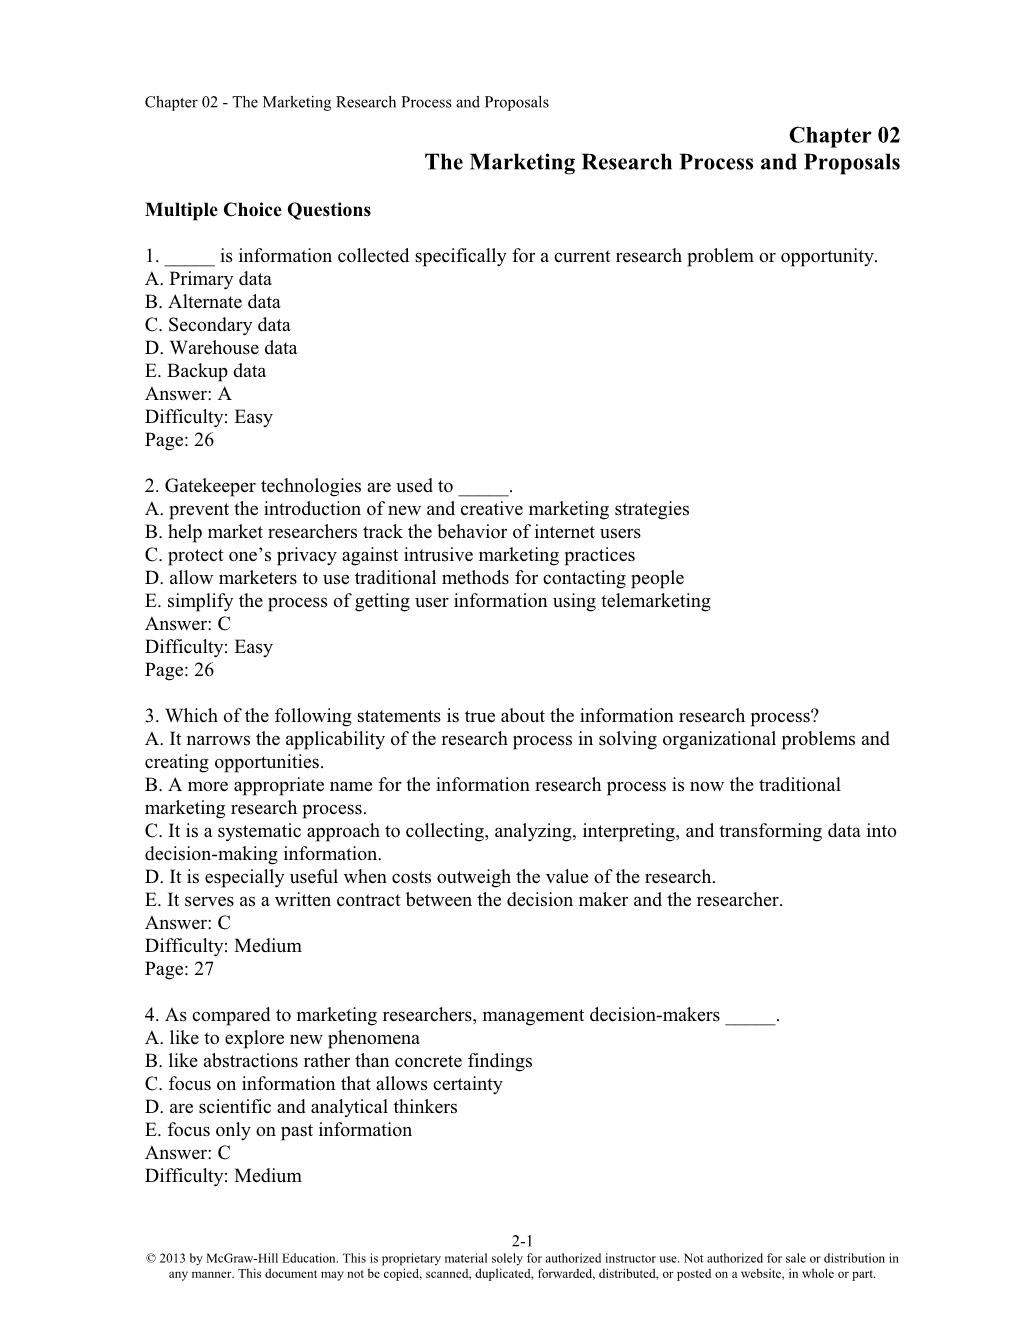 Chapter 02 the Marketing Research Process and Proposals